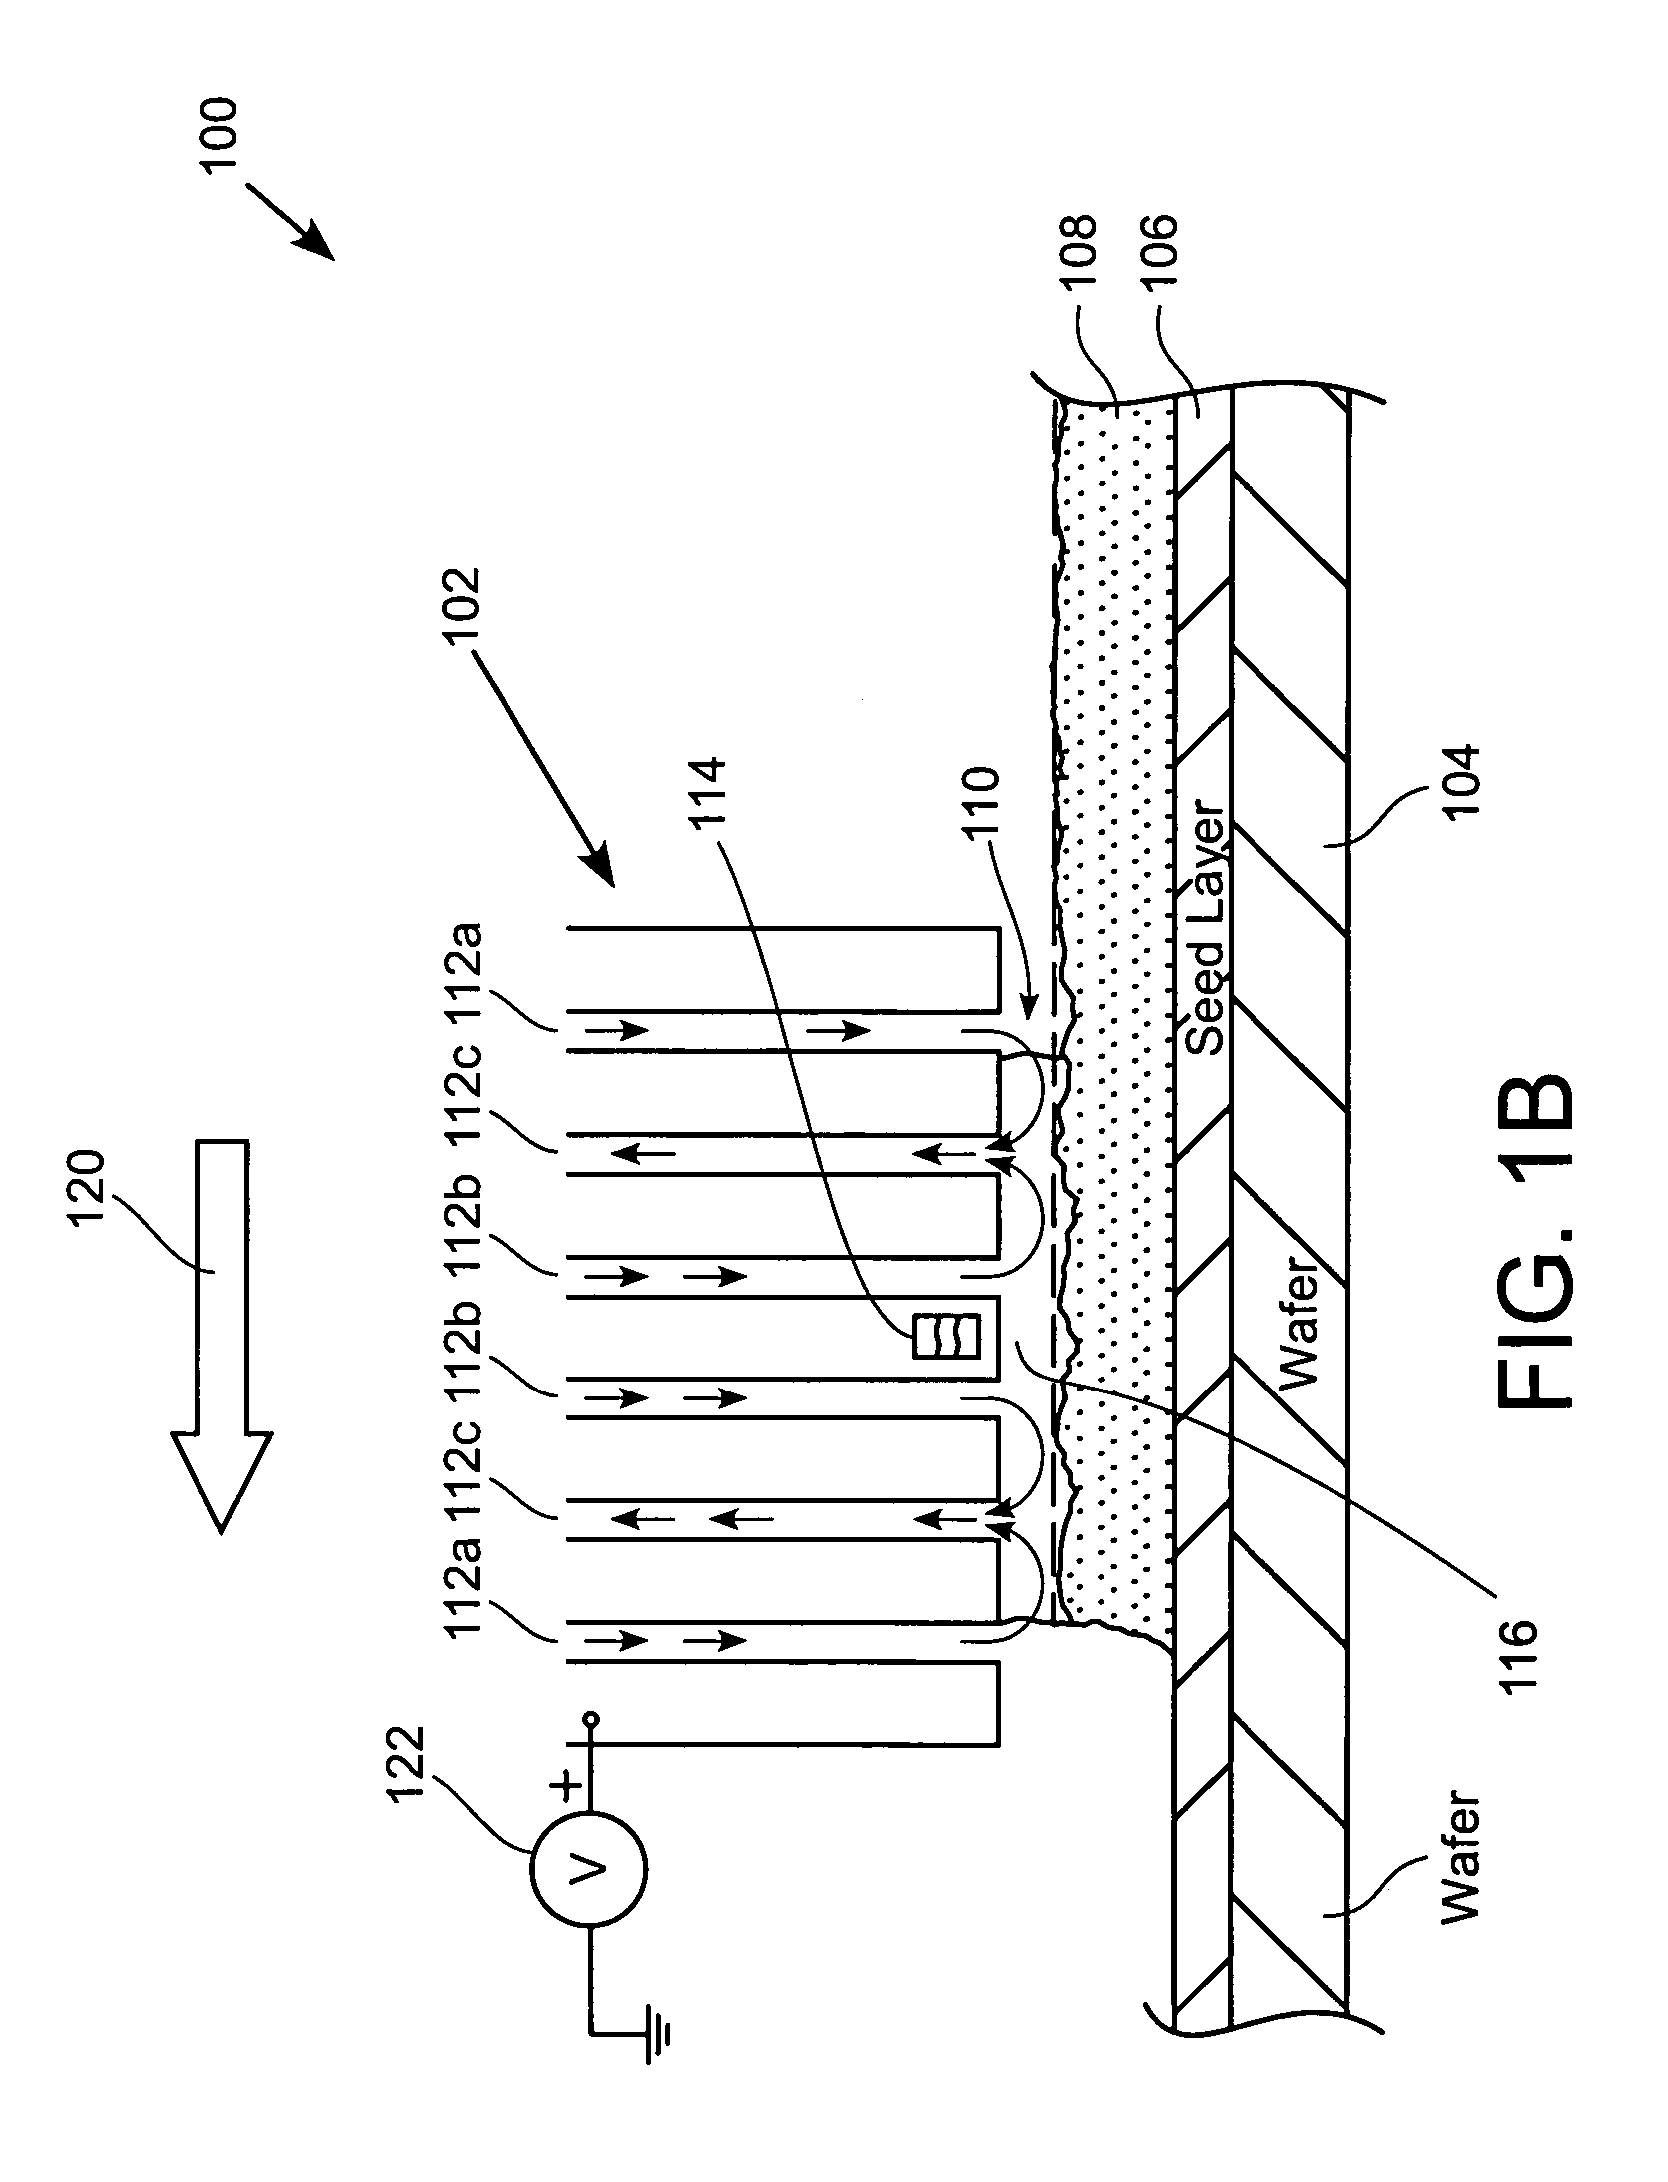 Apparatus and method for depositing and planarizing thin films of semiconductor wafers